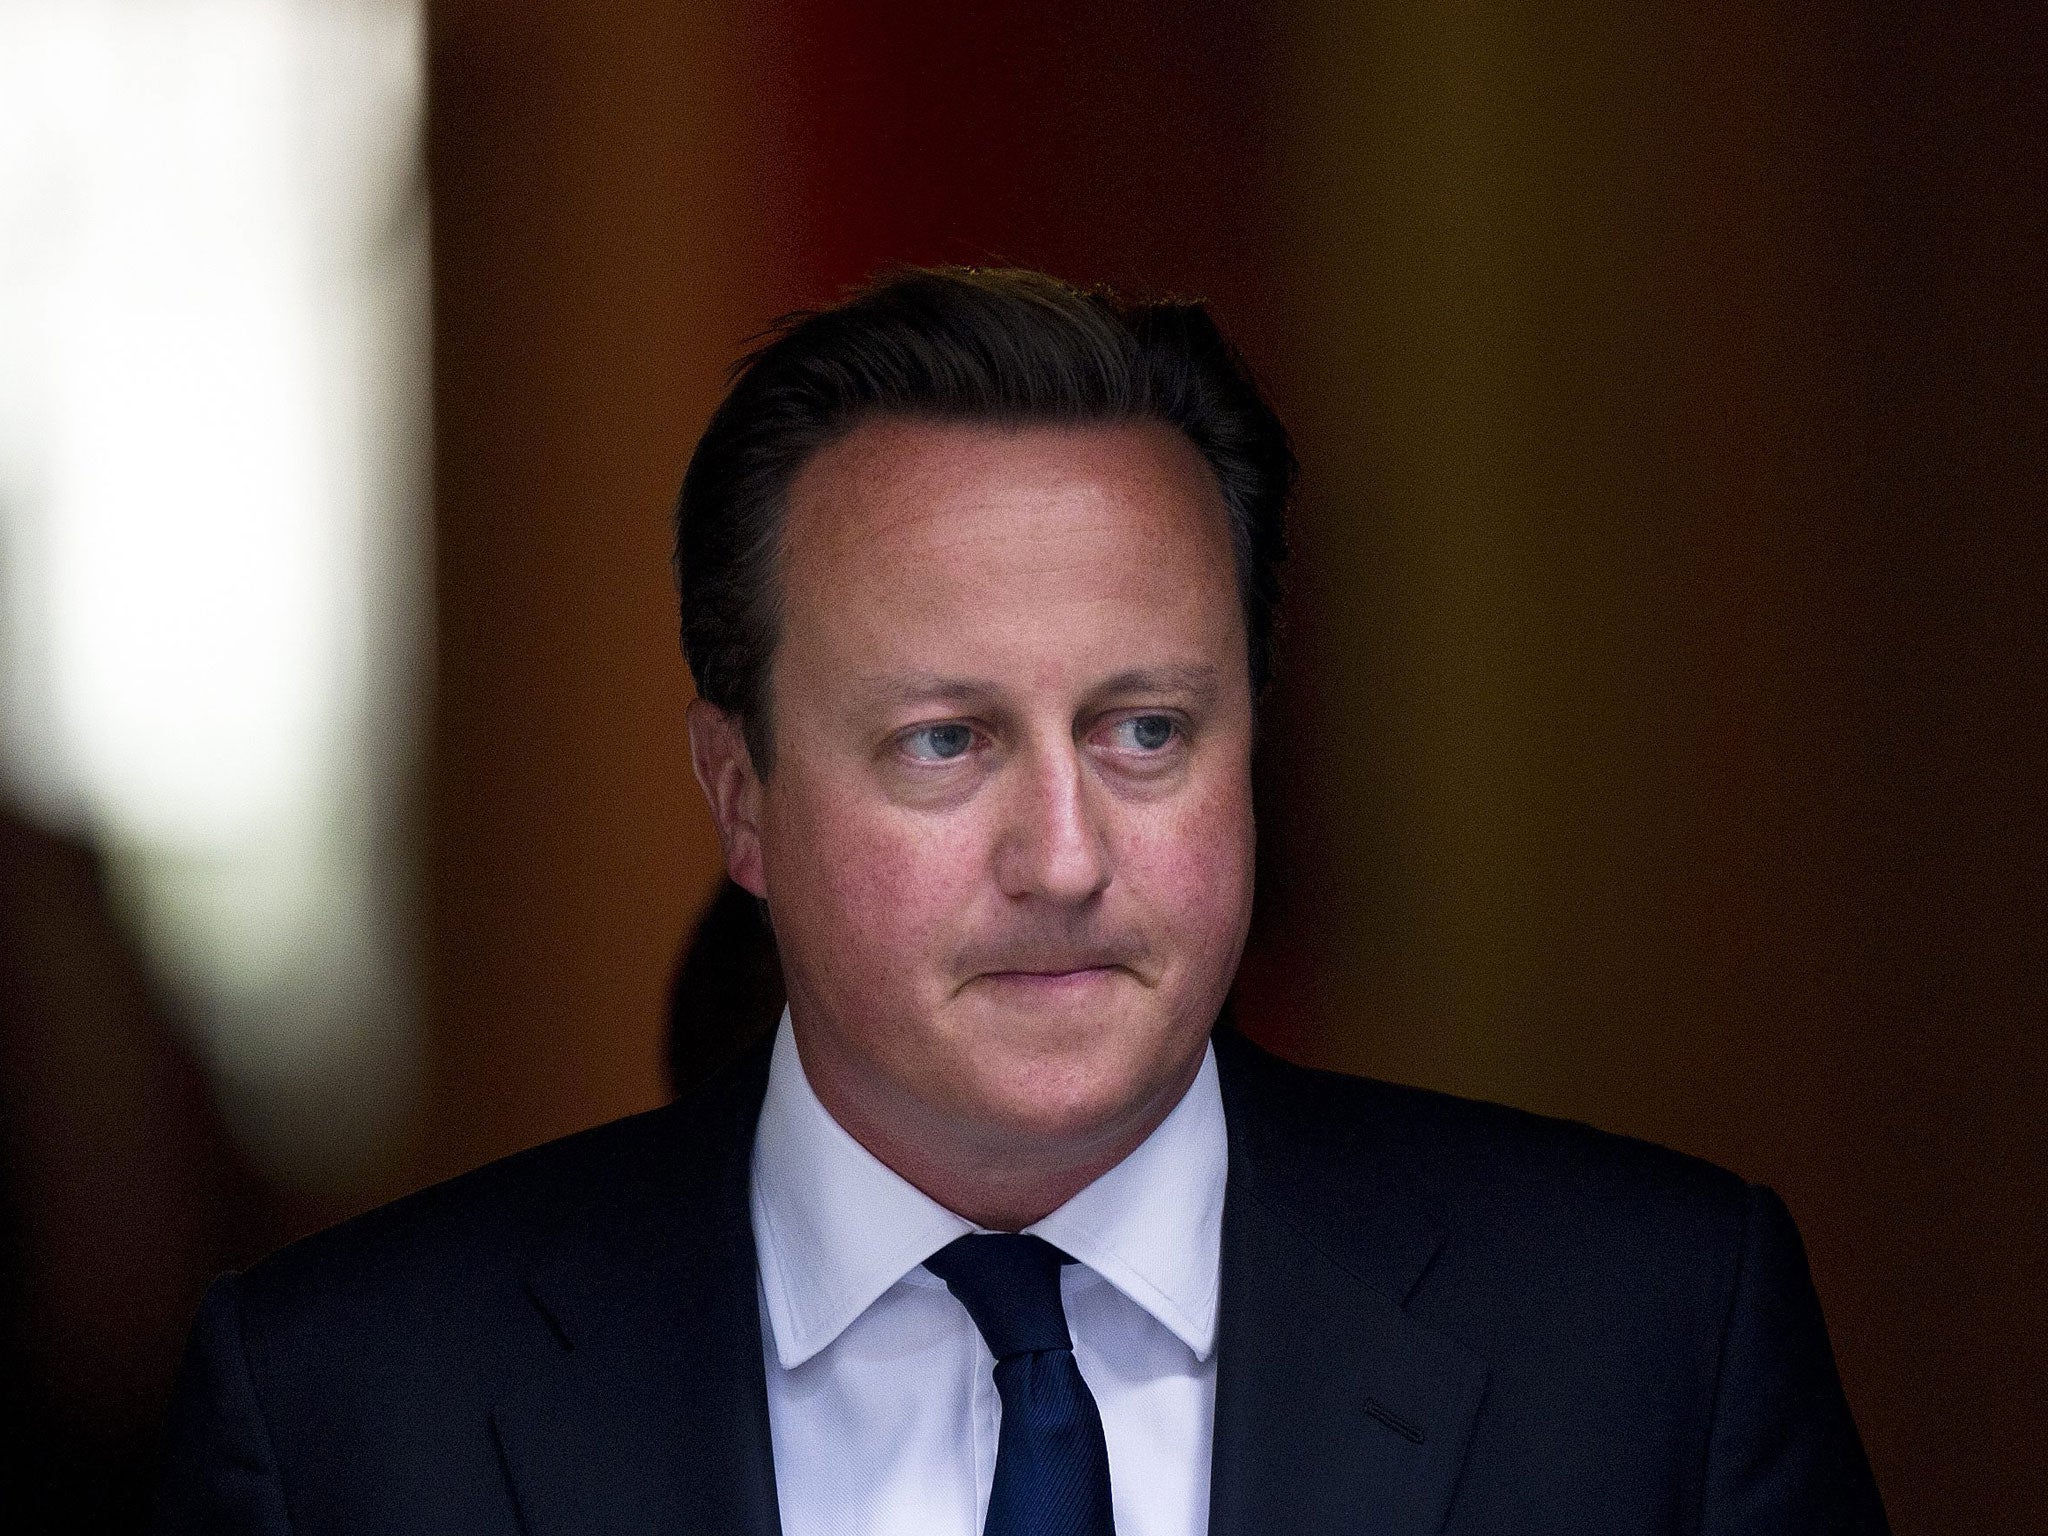 David Cameron announced the 2014 summit today